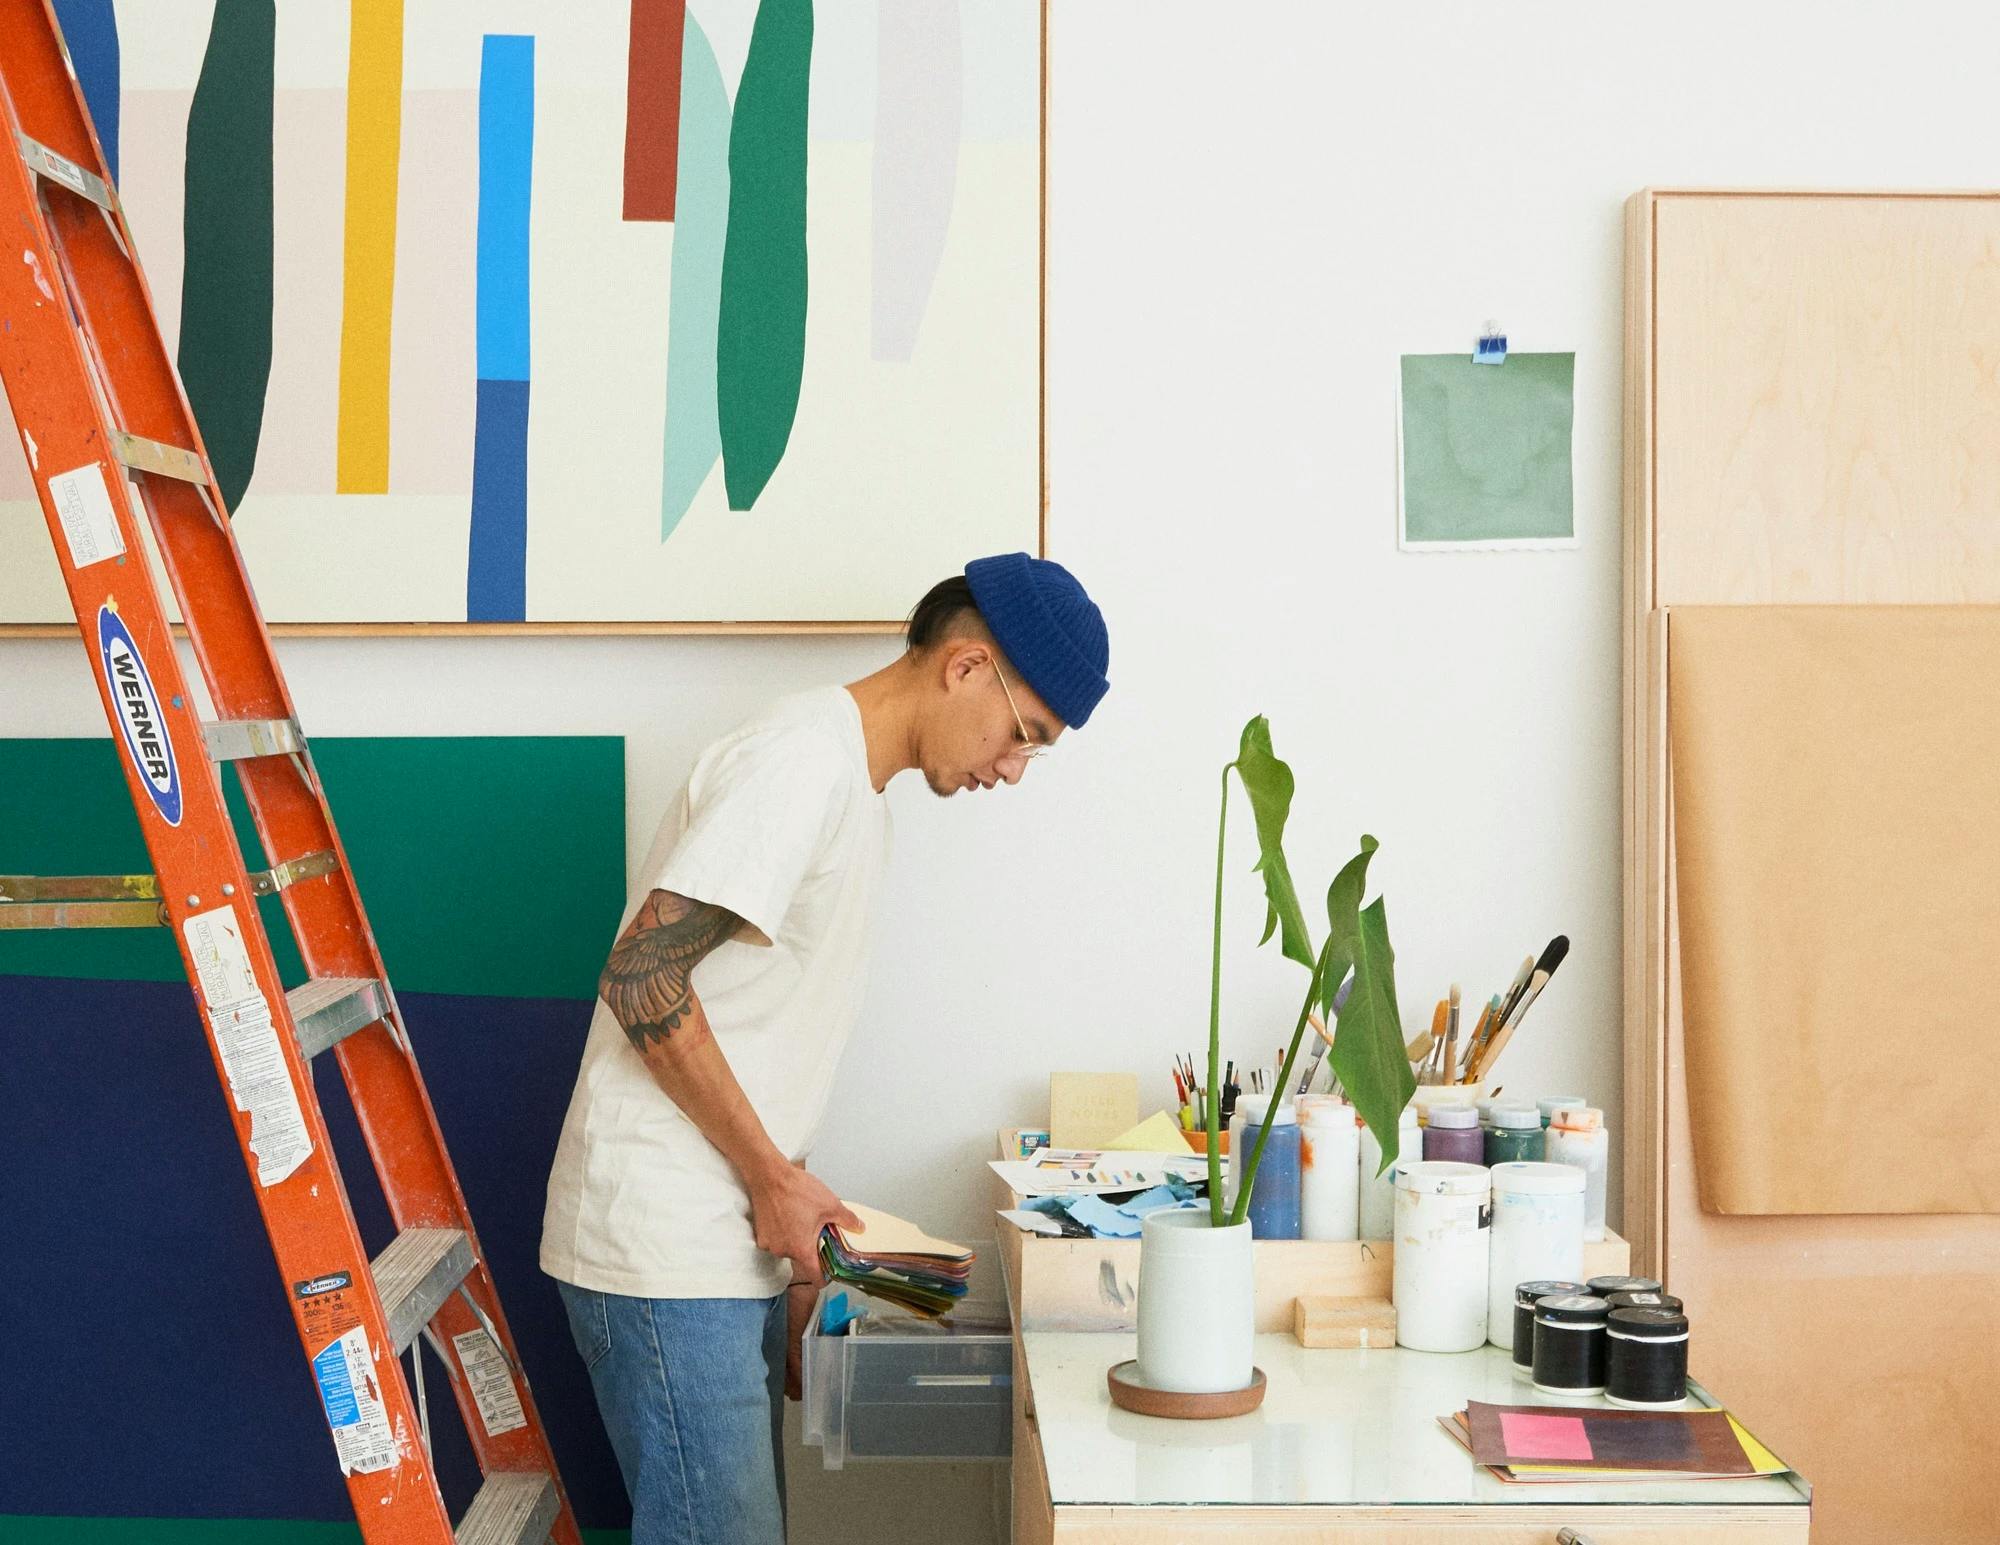 Artist Scott Sueme wearing a blue beanie hat, white t-shirt, and jeans working in his studio standing next to a red ladder.